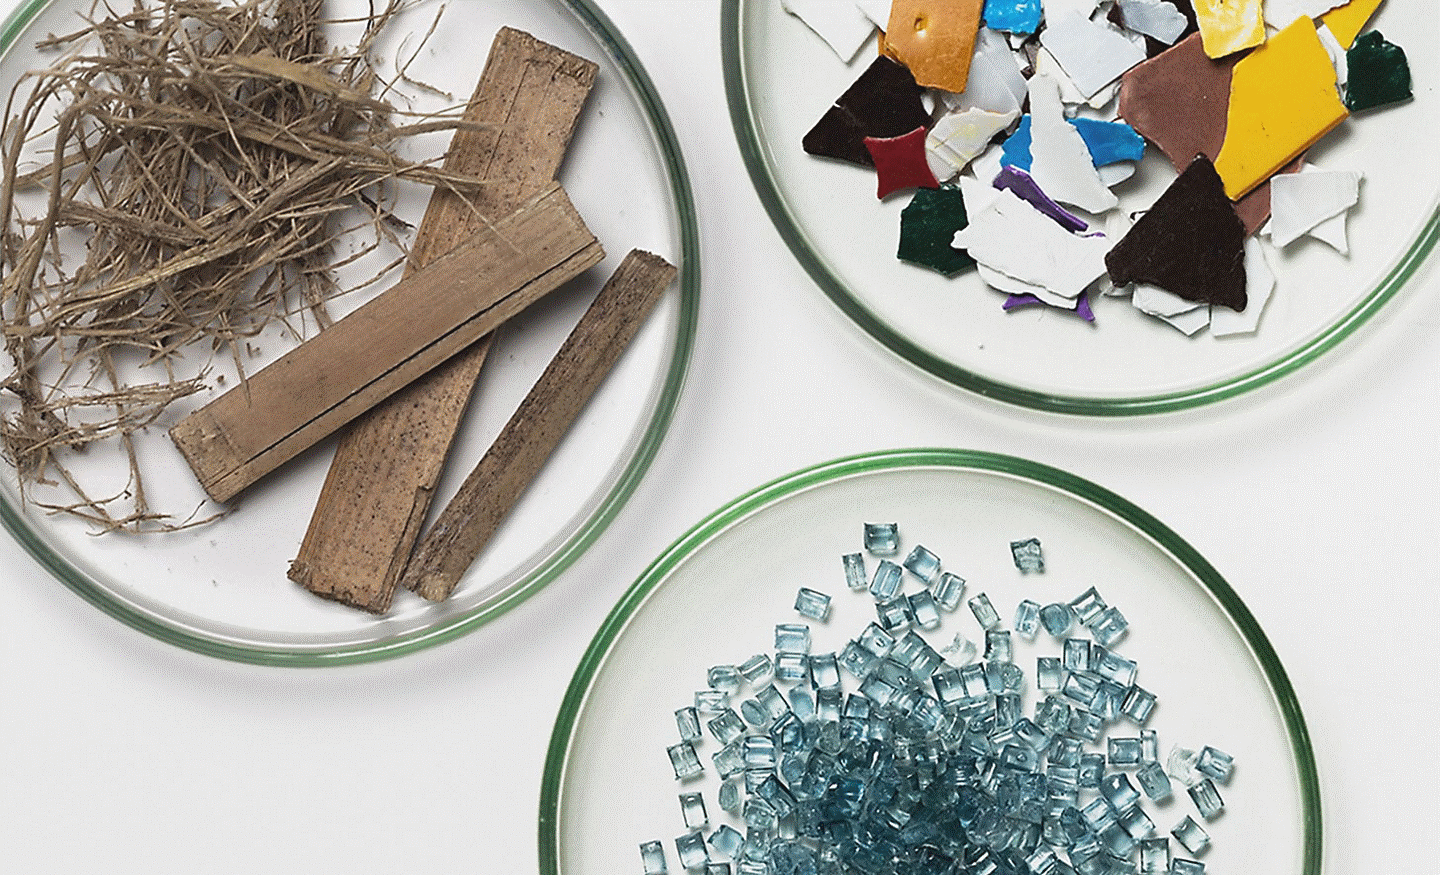 A range of recycled materials dispalyed on glass plates